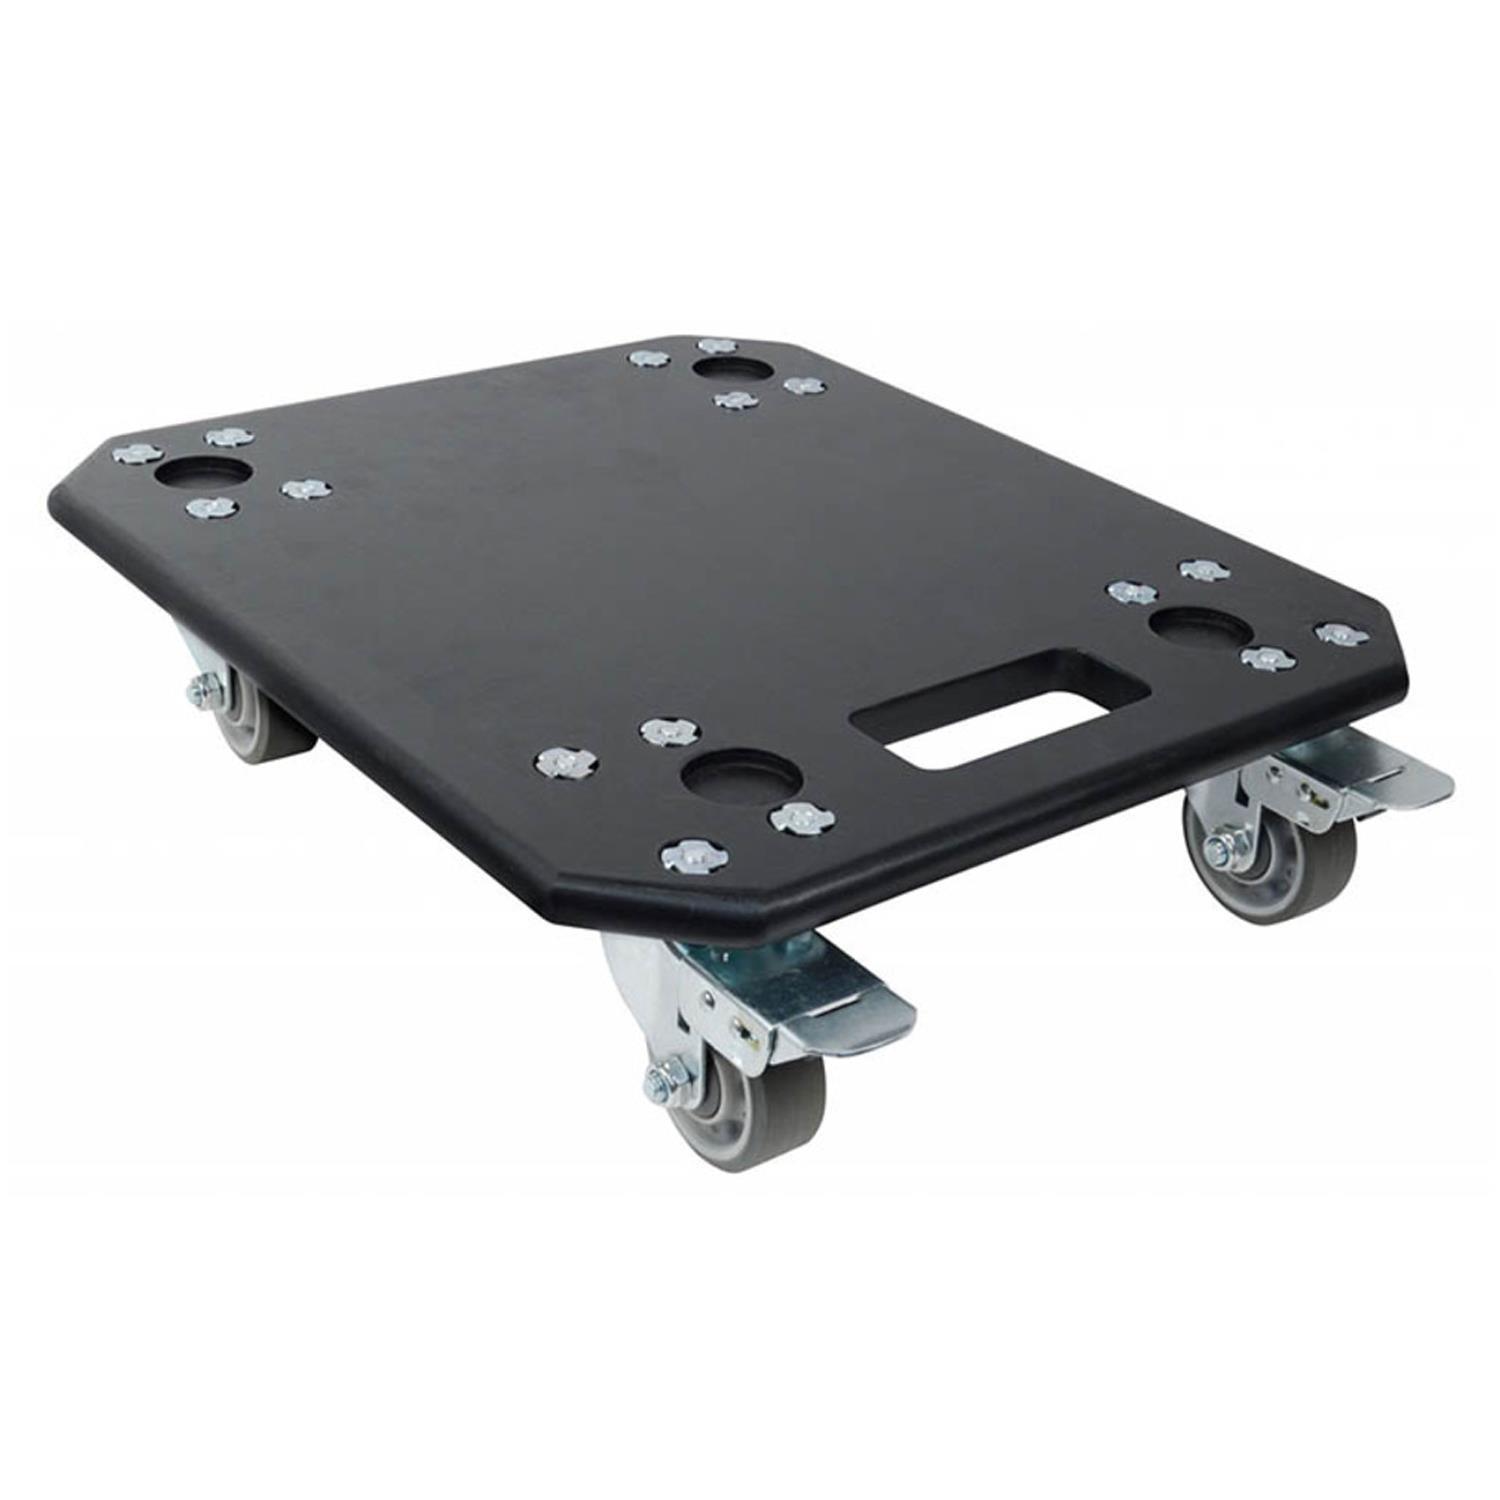 StageCore Skate 2 Wheel Board / Skate, with wheels - DY Pro Audio